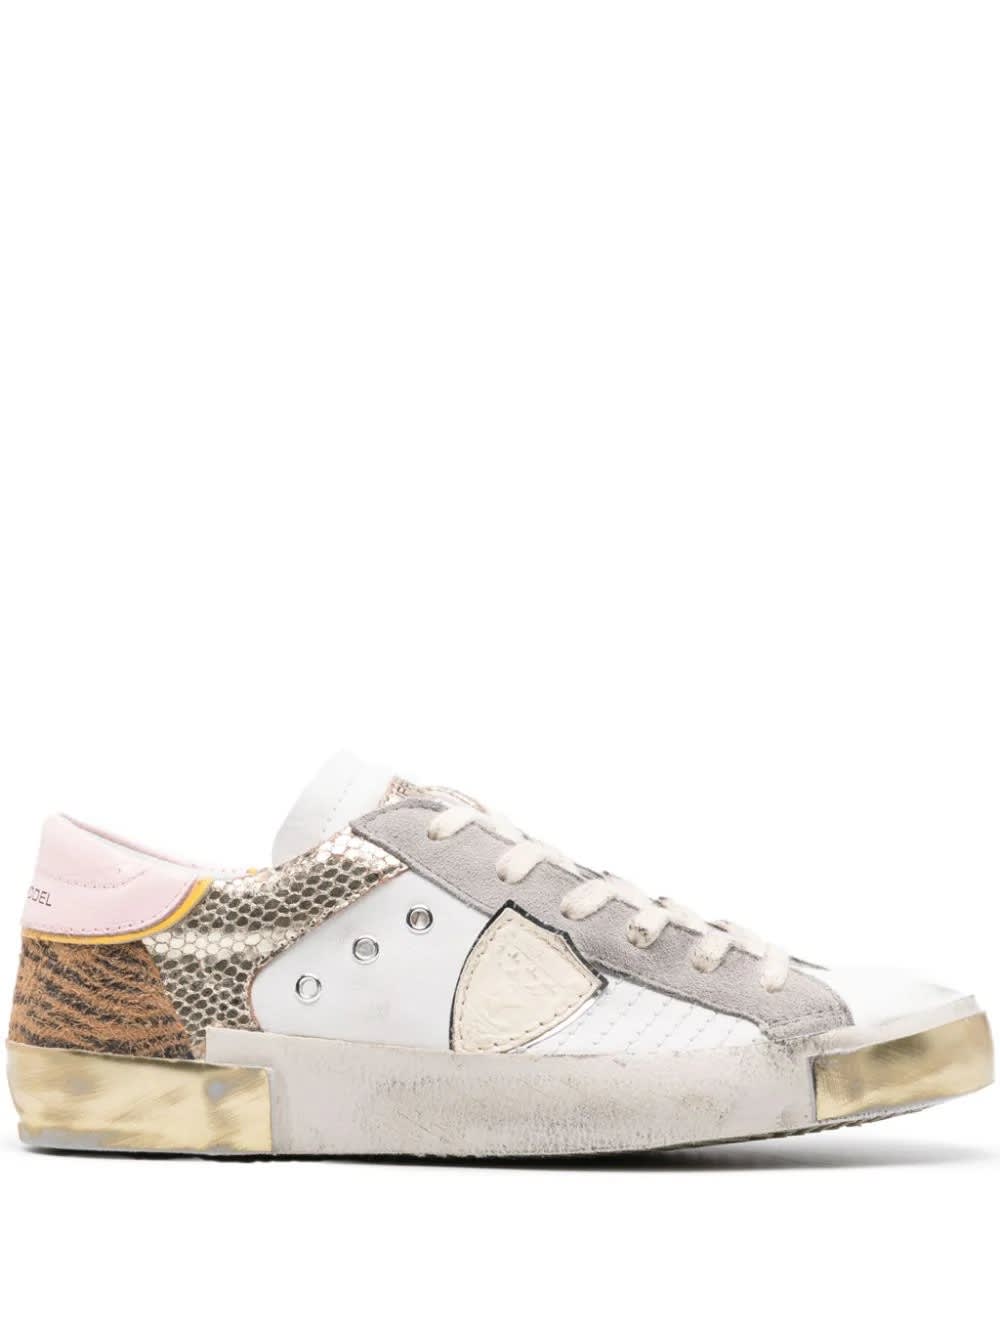 Prsx Low Sneakers - White, Animalier And Gold